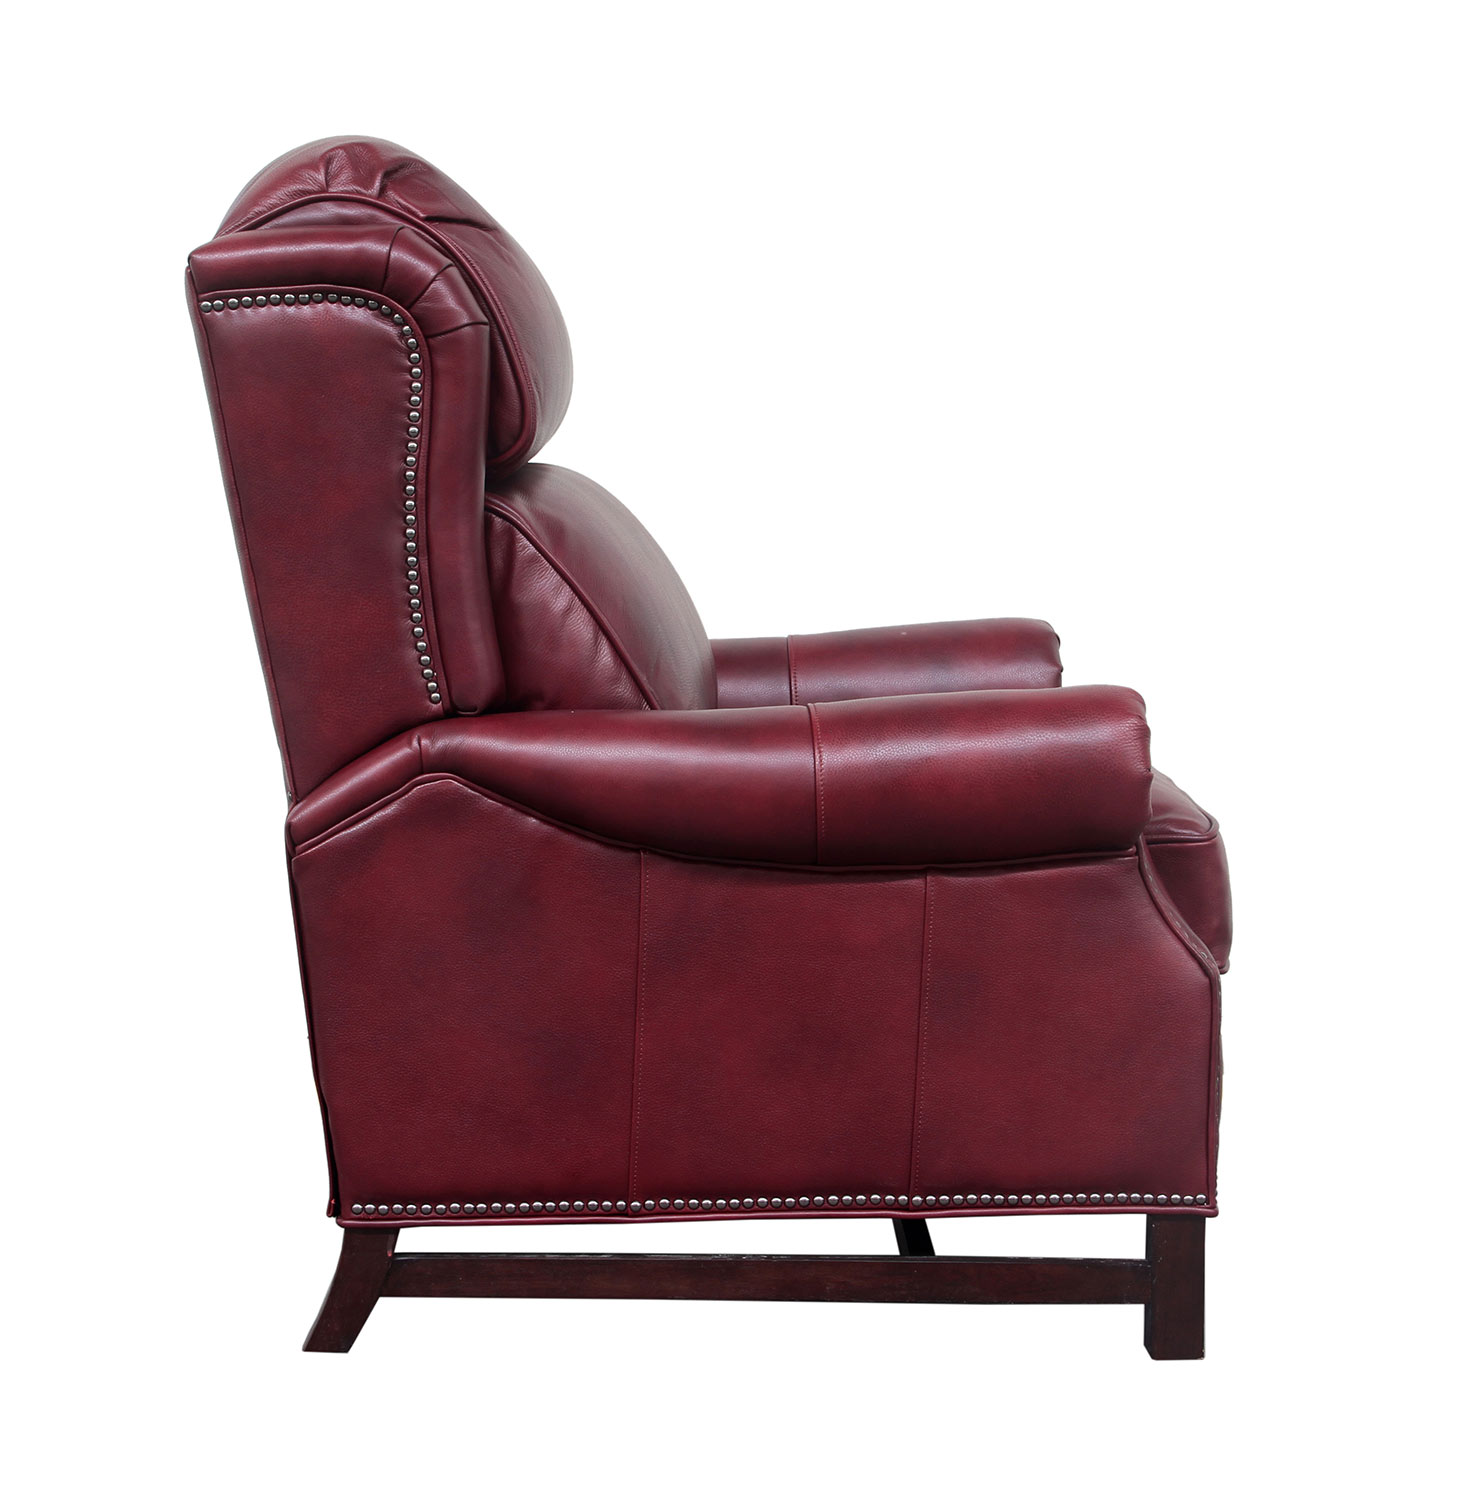 Barcalounger Thornfield Recliner Chair - Wenlock Carmine/All Leather